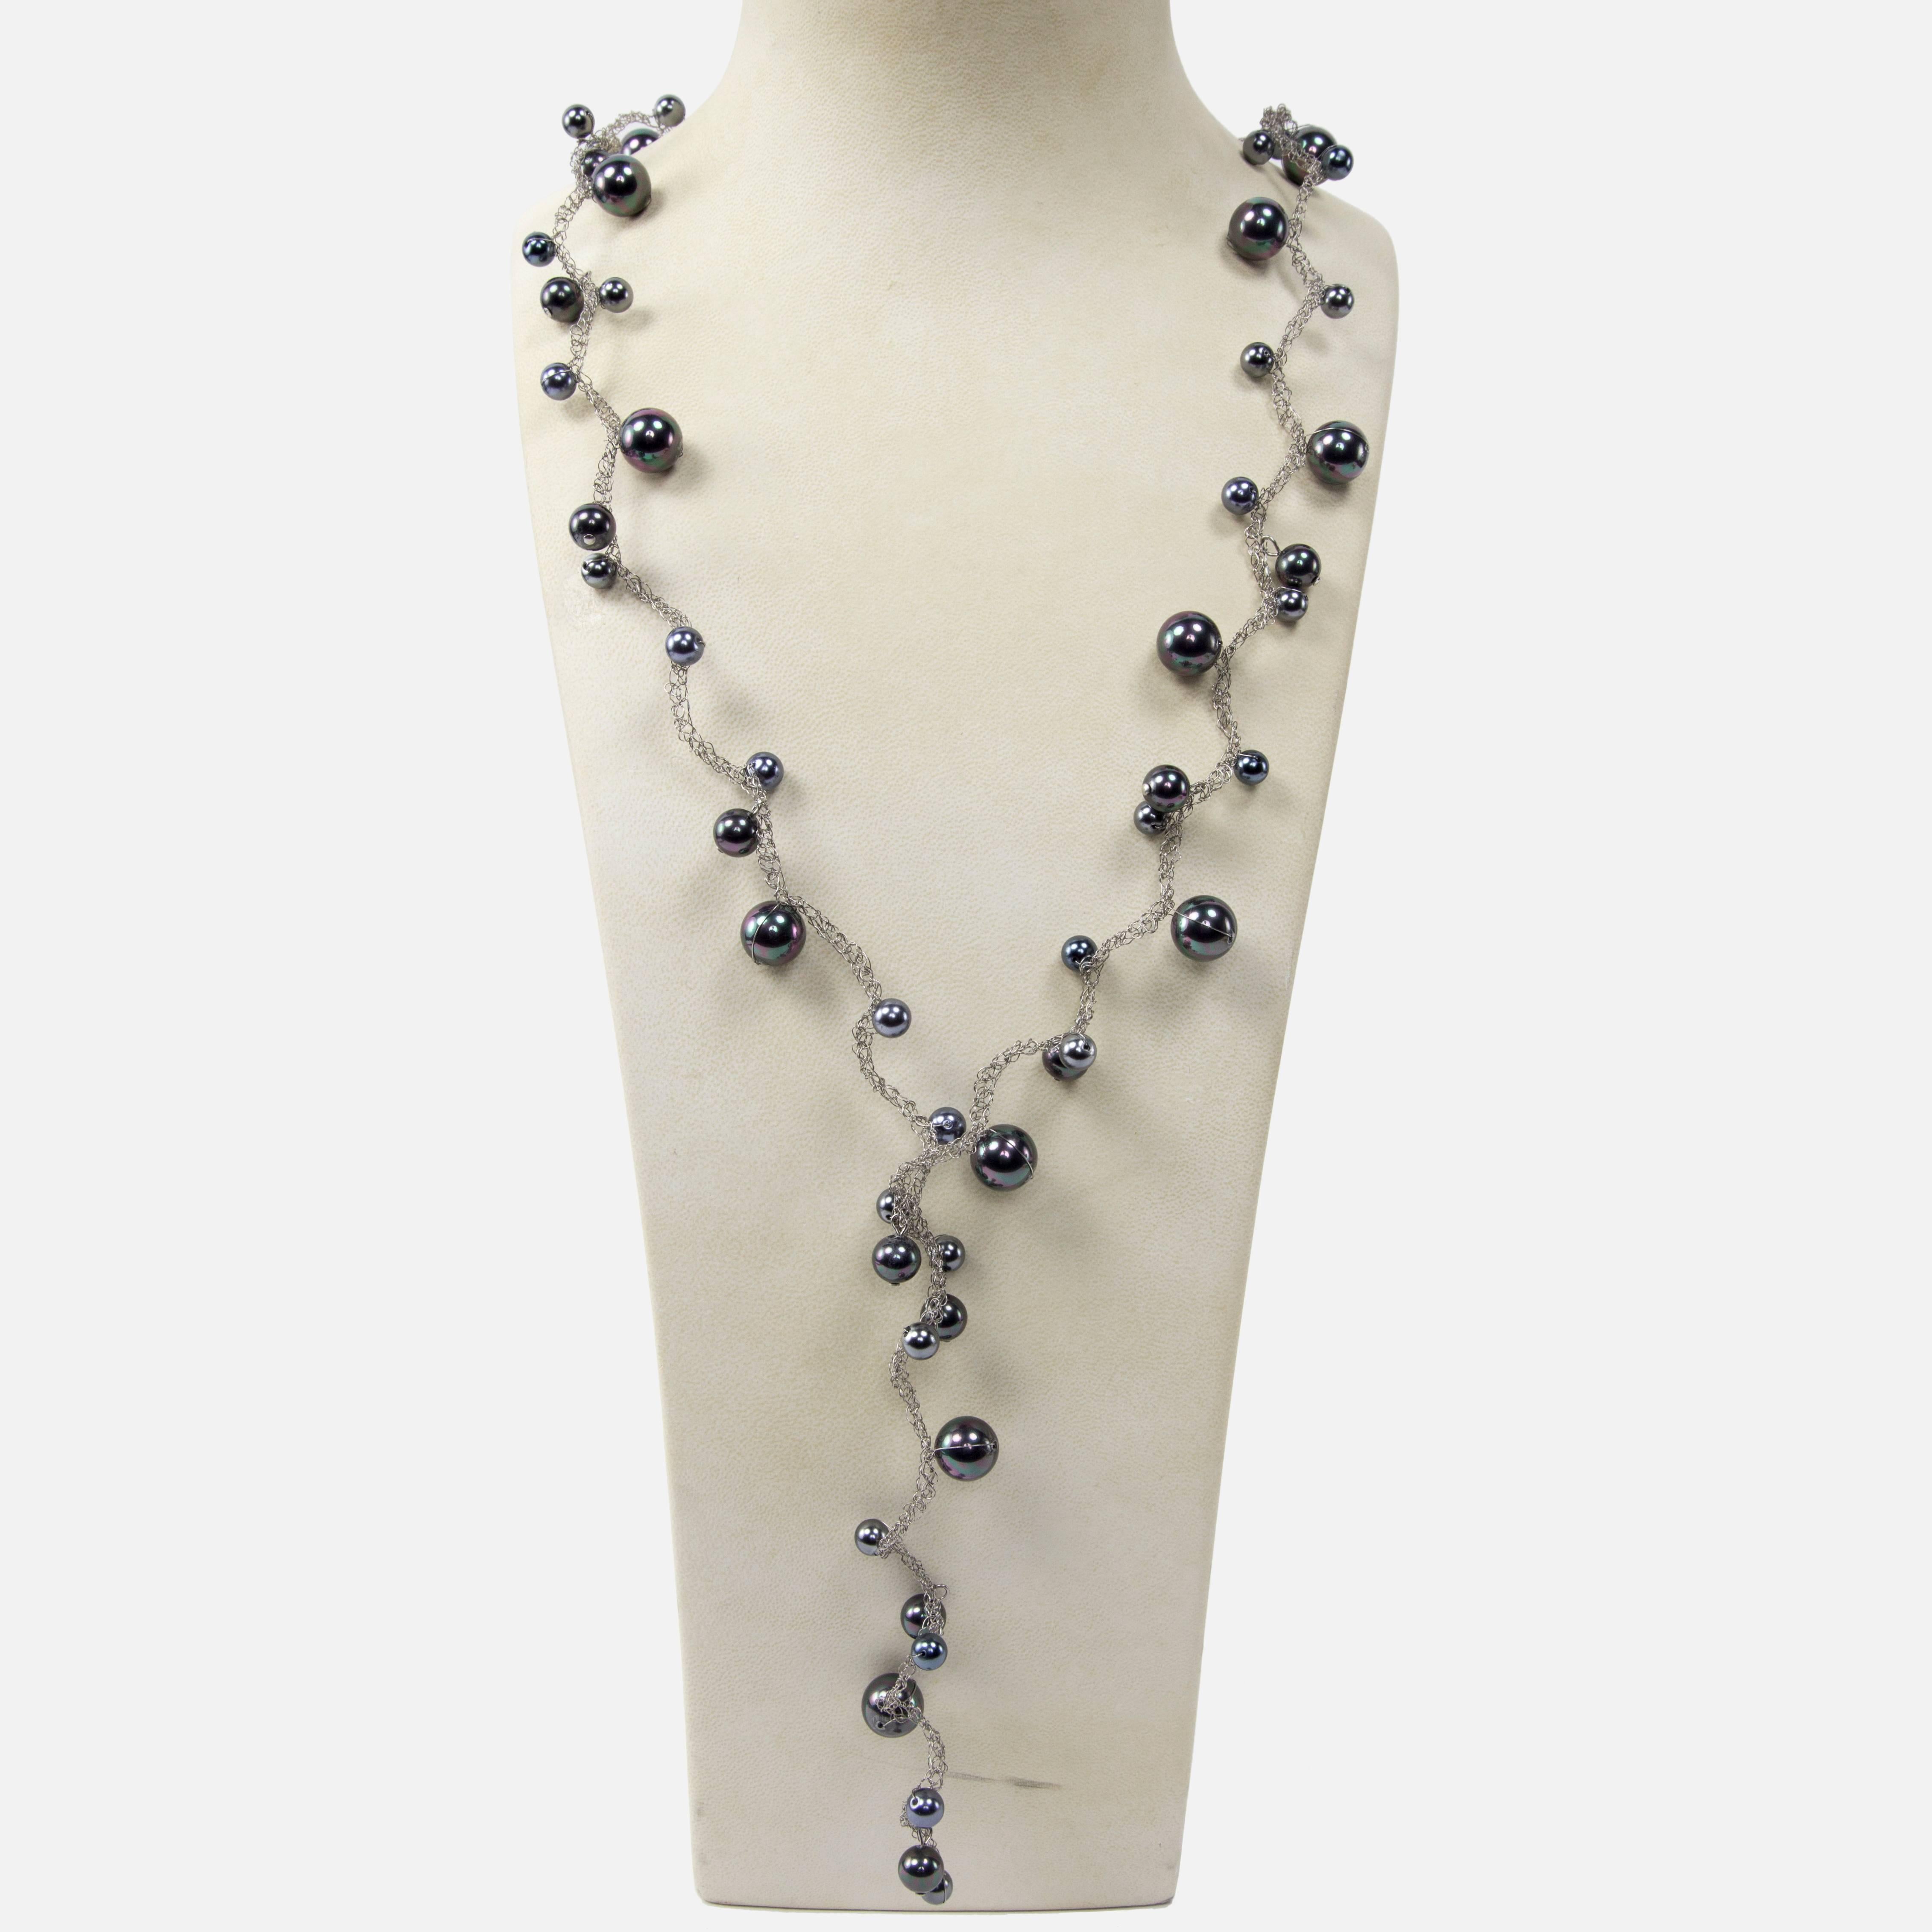 Long elegant & stylish Sautoir Necklace made of graduated round Faux Silver Grey Pearls on braided stainless steel wire chain; vintage; approx. pearl sizes: large 14.5mm; medium 10mm and small beads 8mm; approx. length of Necklace: 46